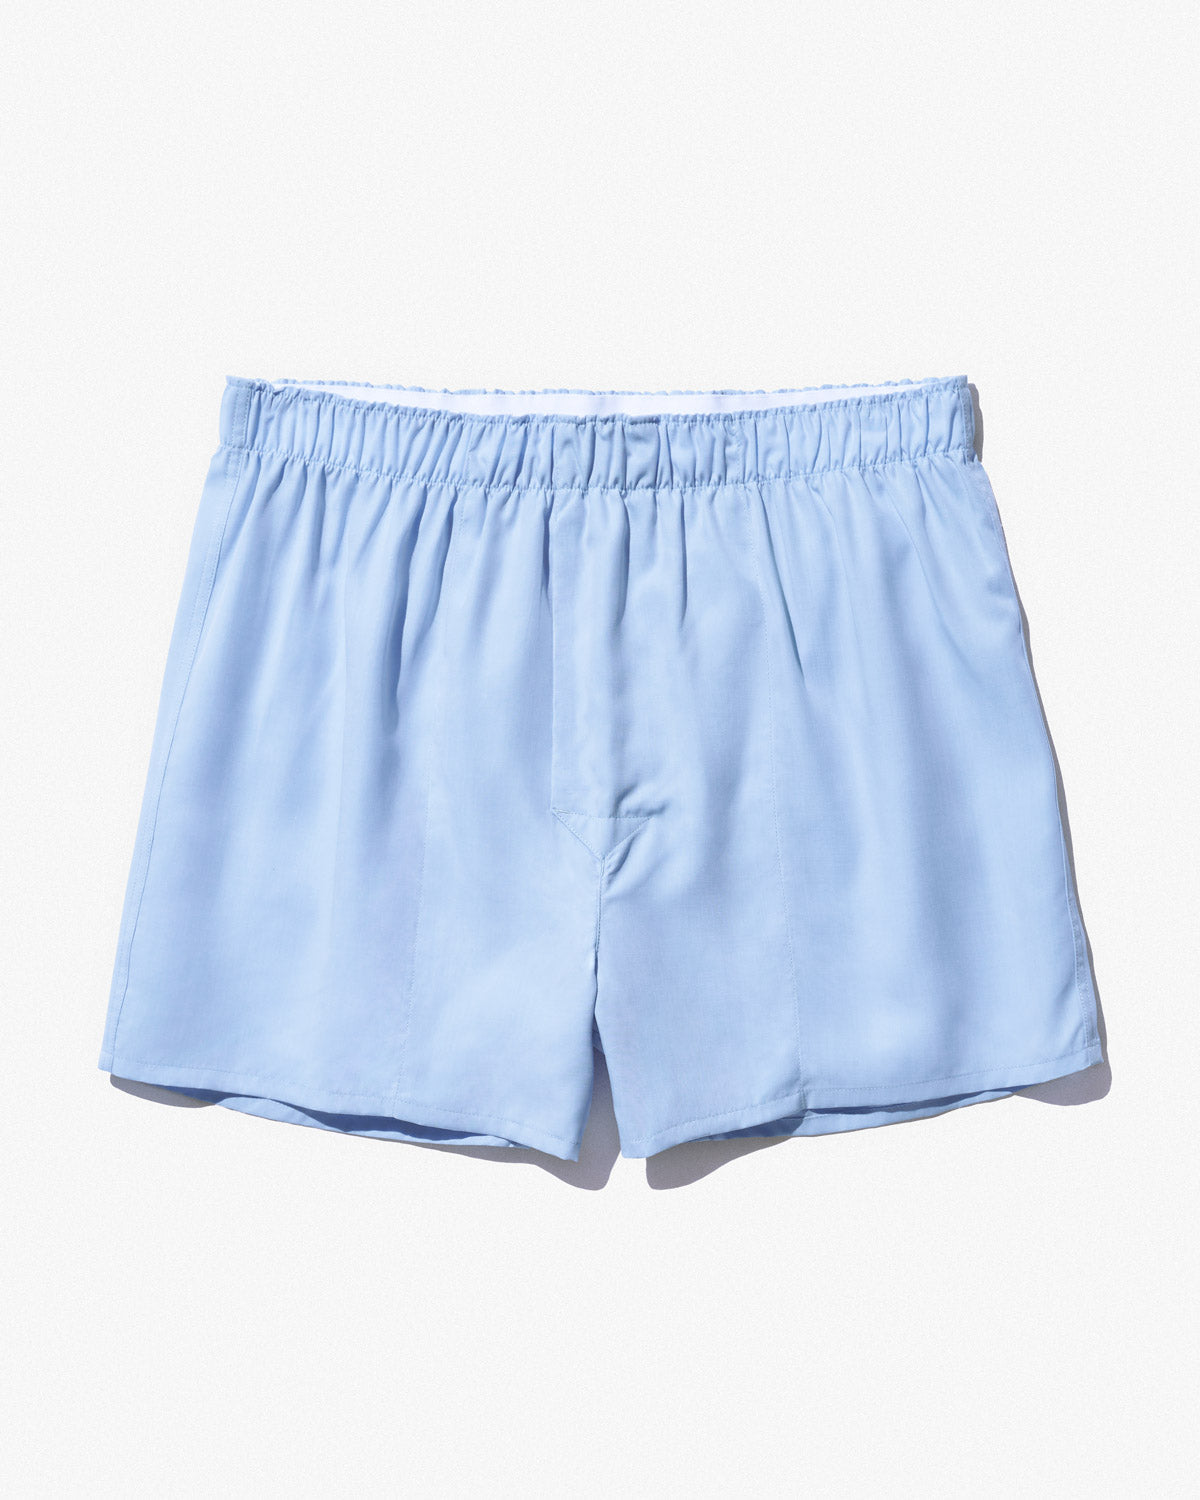 Men's Woven Boxer Shorts Classic in Sky Blue